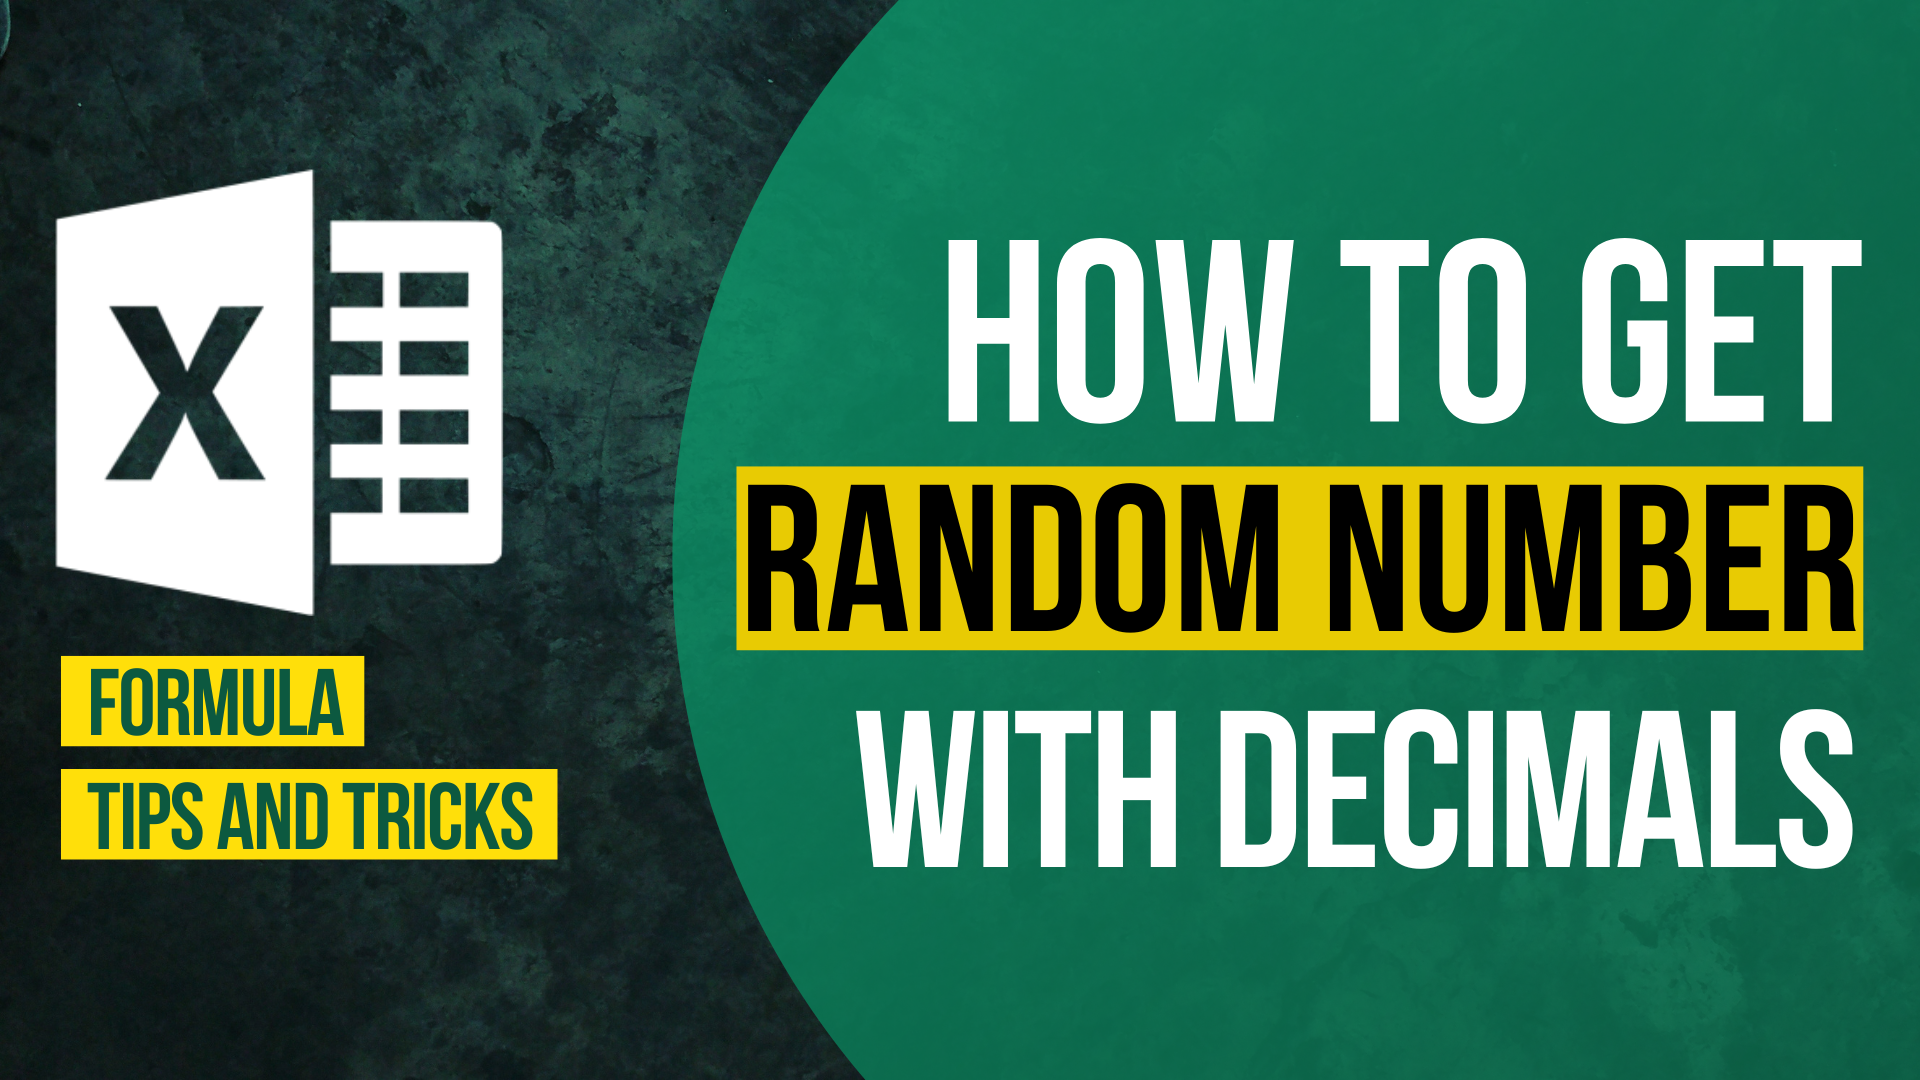 How to generate random numbers with decimals